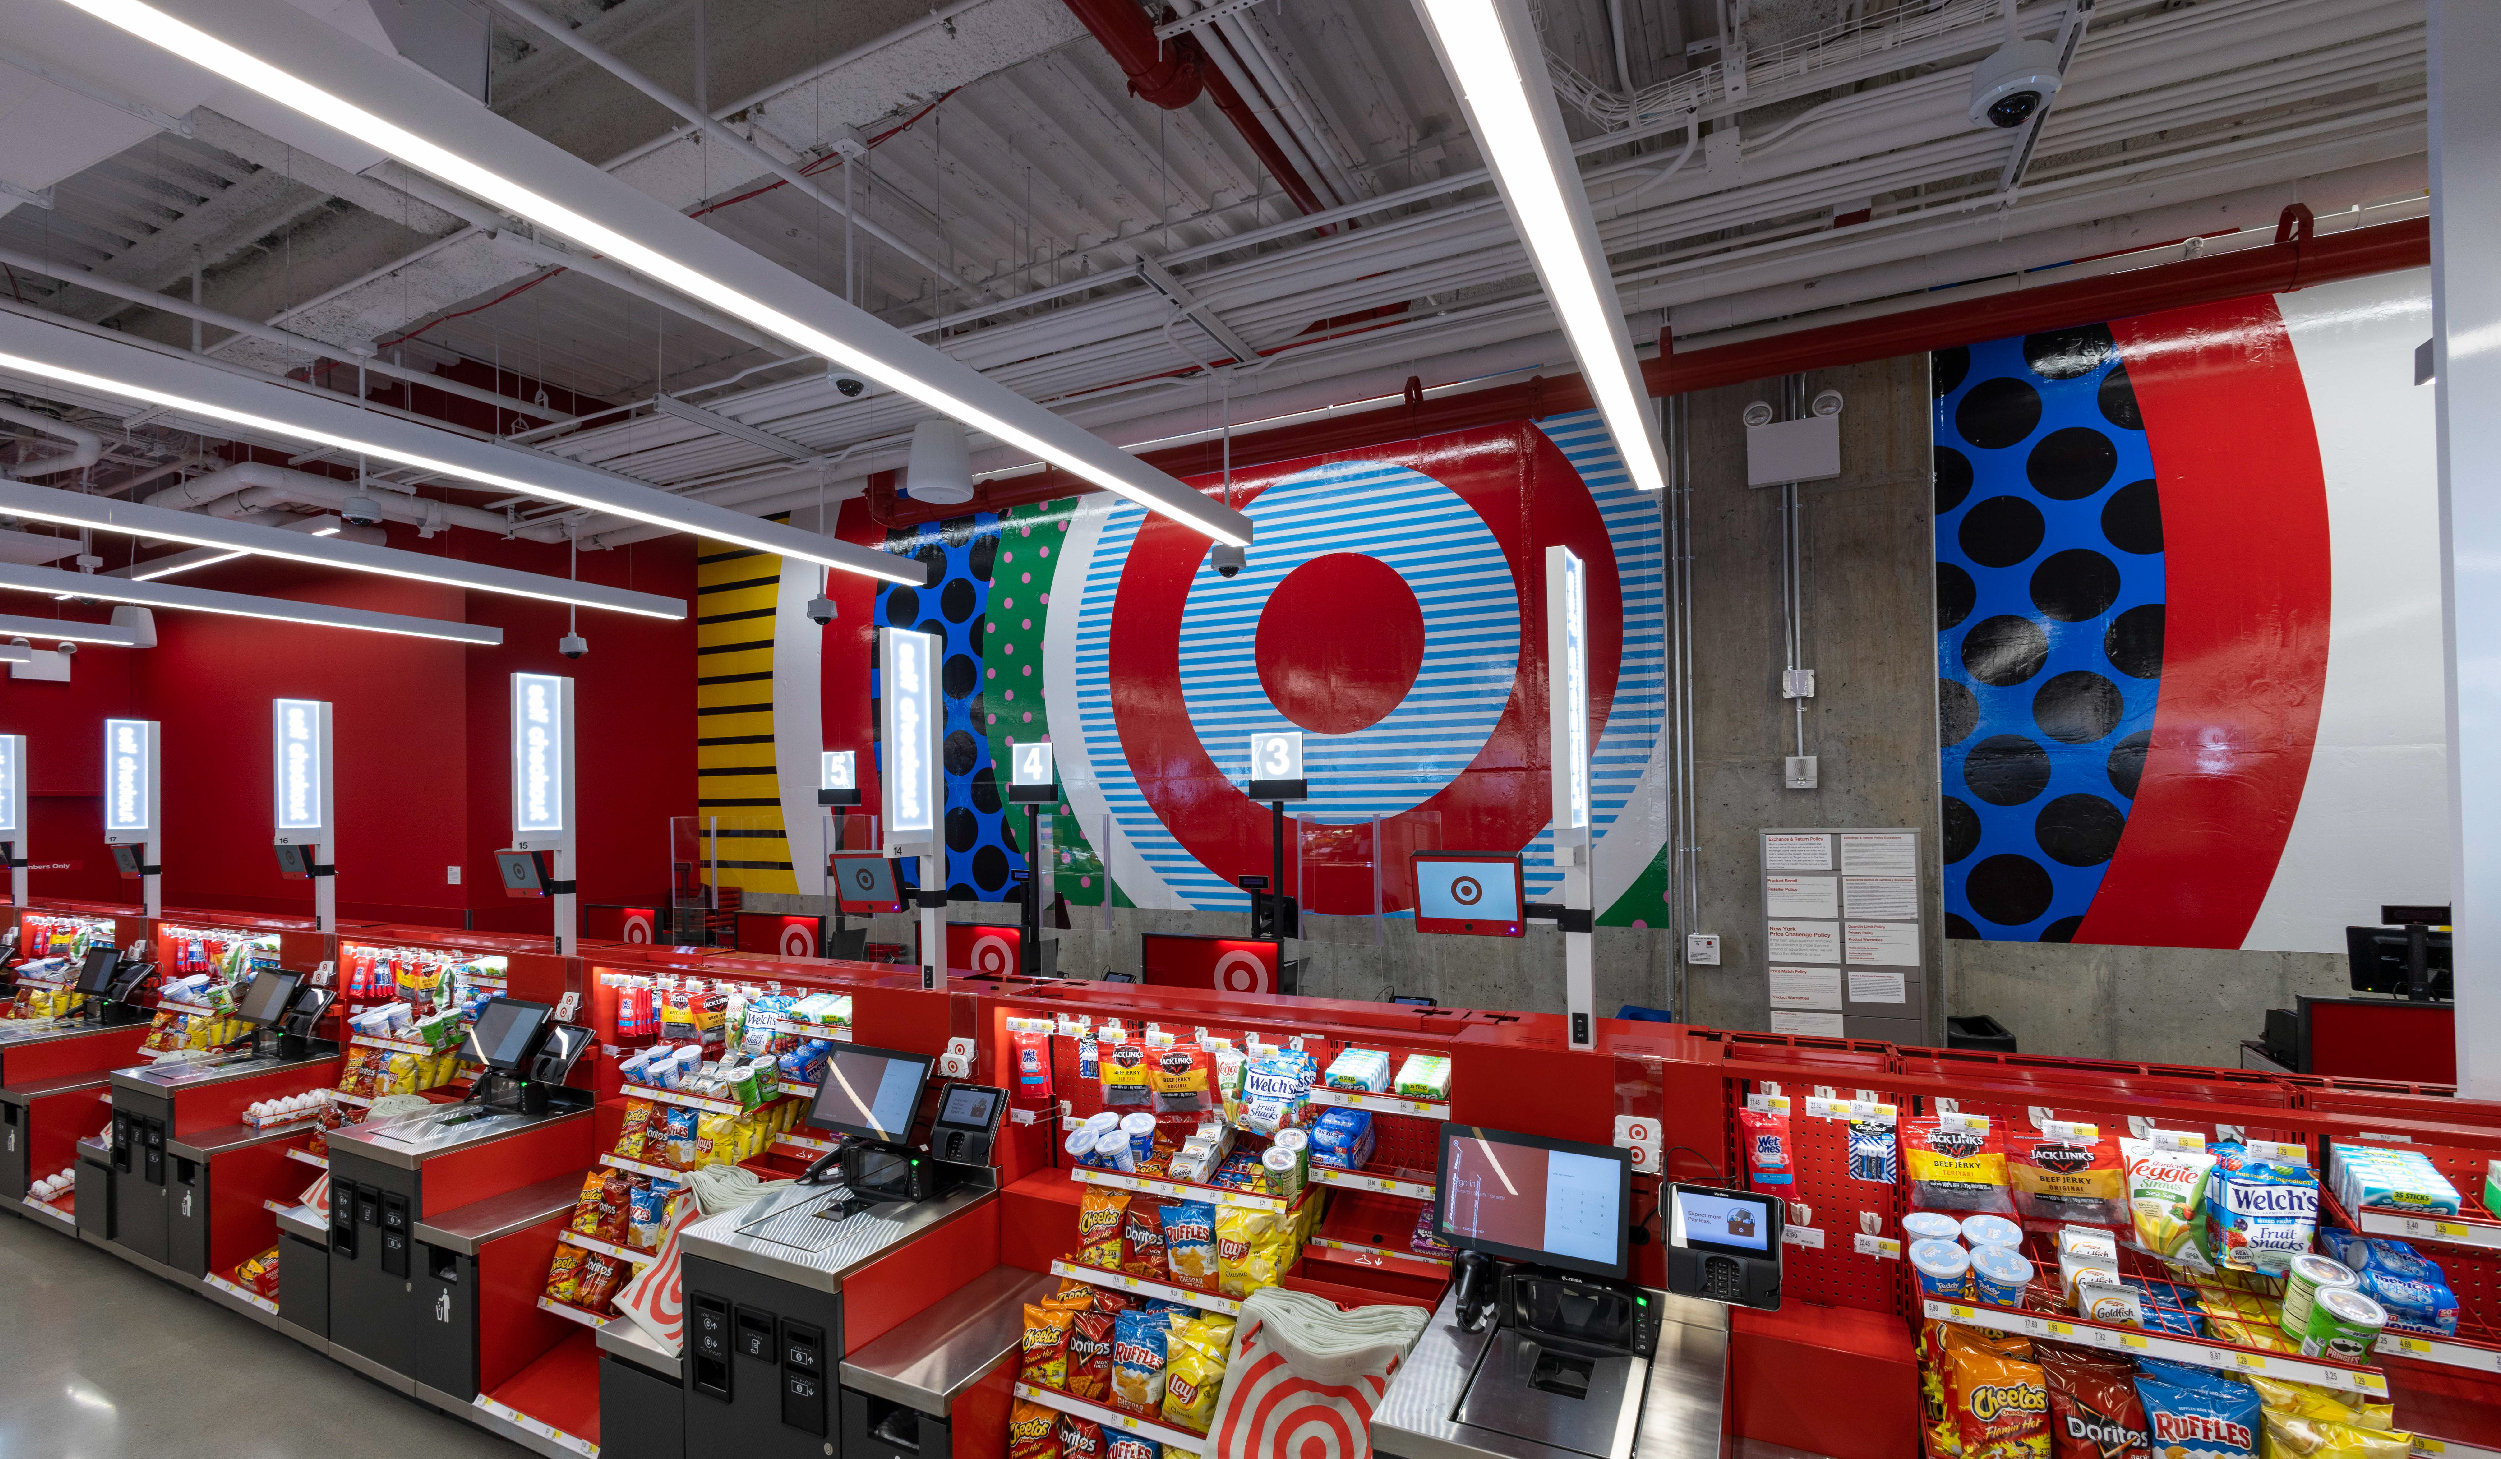 Colorful bullseye artwork hangs on a gray wall behind multiple self-checkout stations.